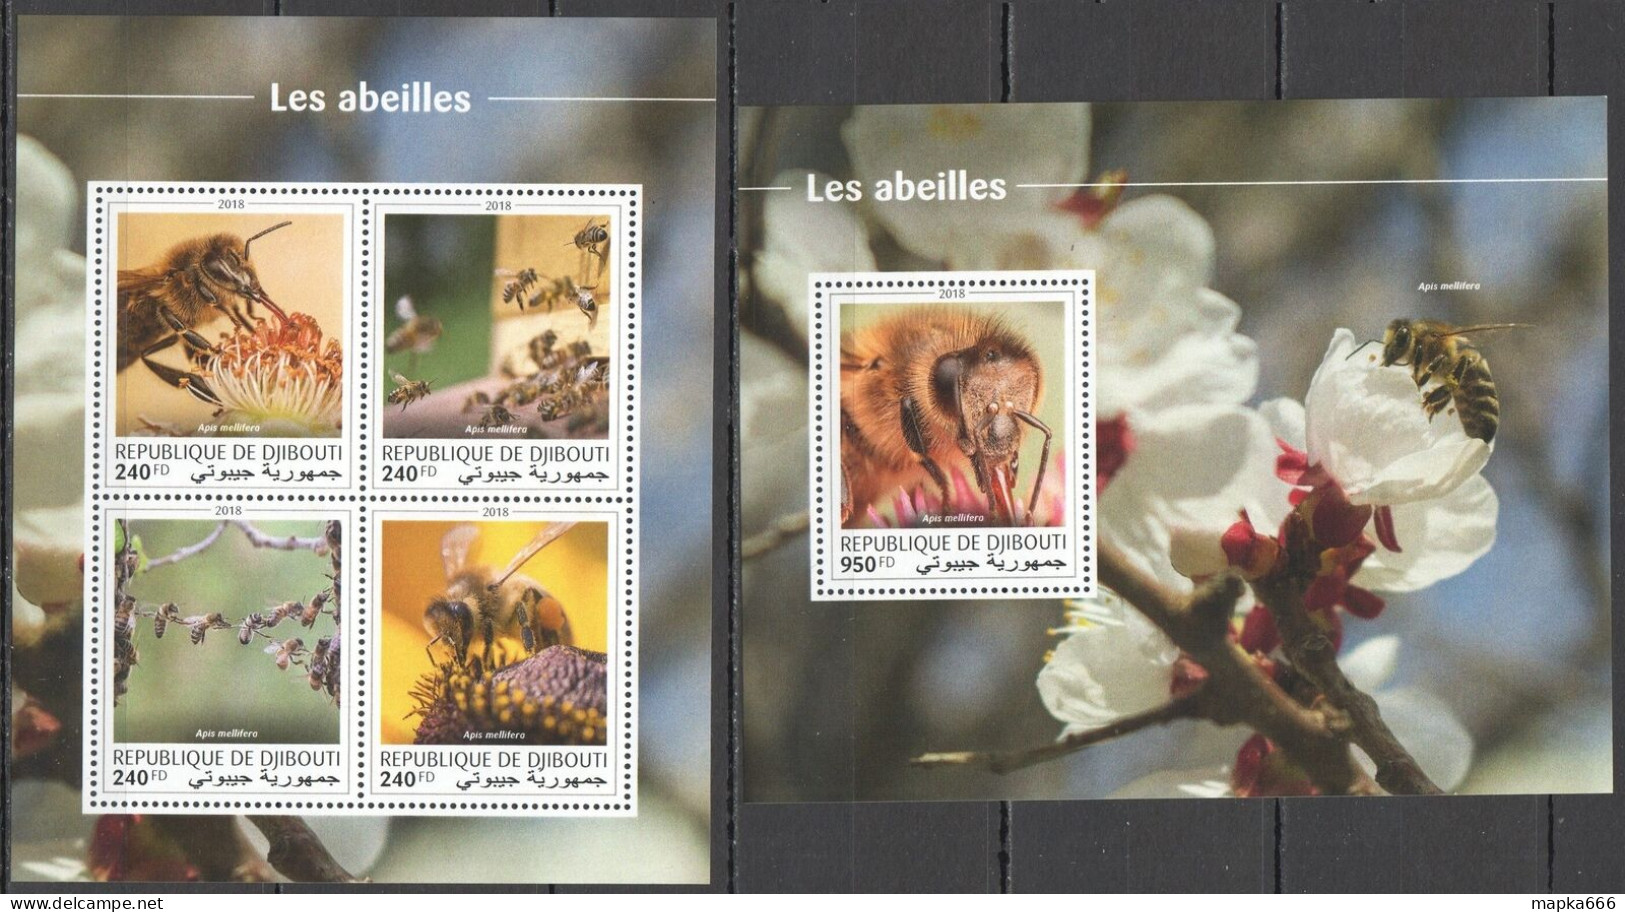 HM0383 2018 DJIBOUTI BEES FLOWERS FLORA & FAUNA INSECTS #2517-0+BL1218 MNH - Abeilles